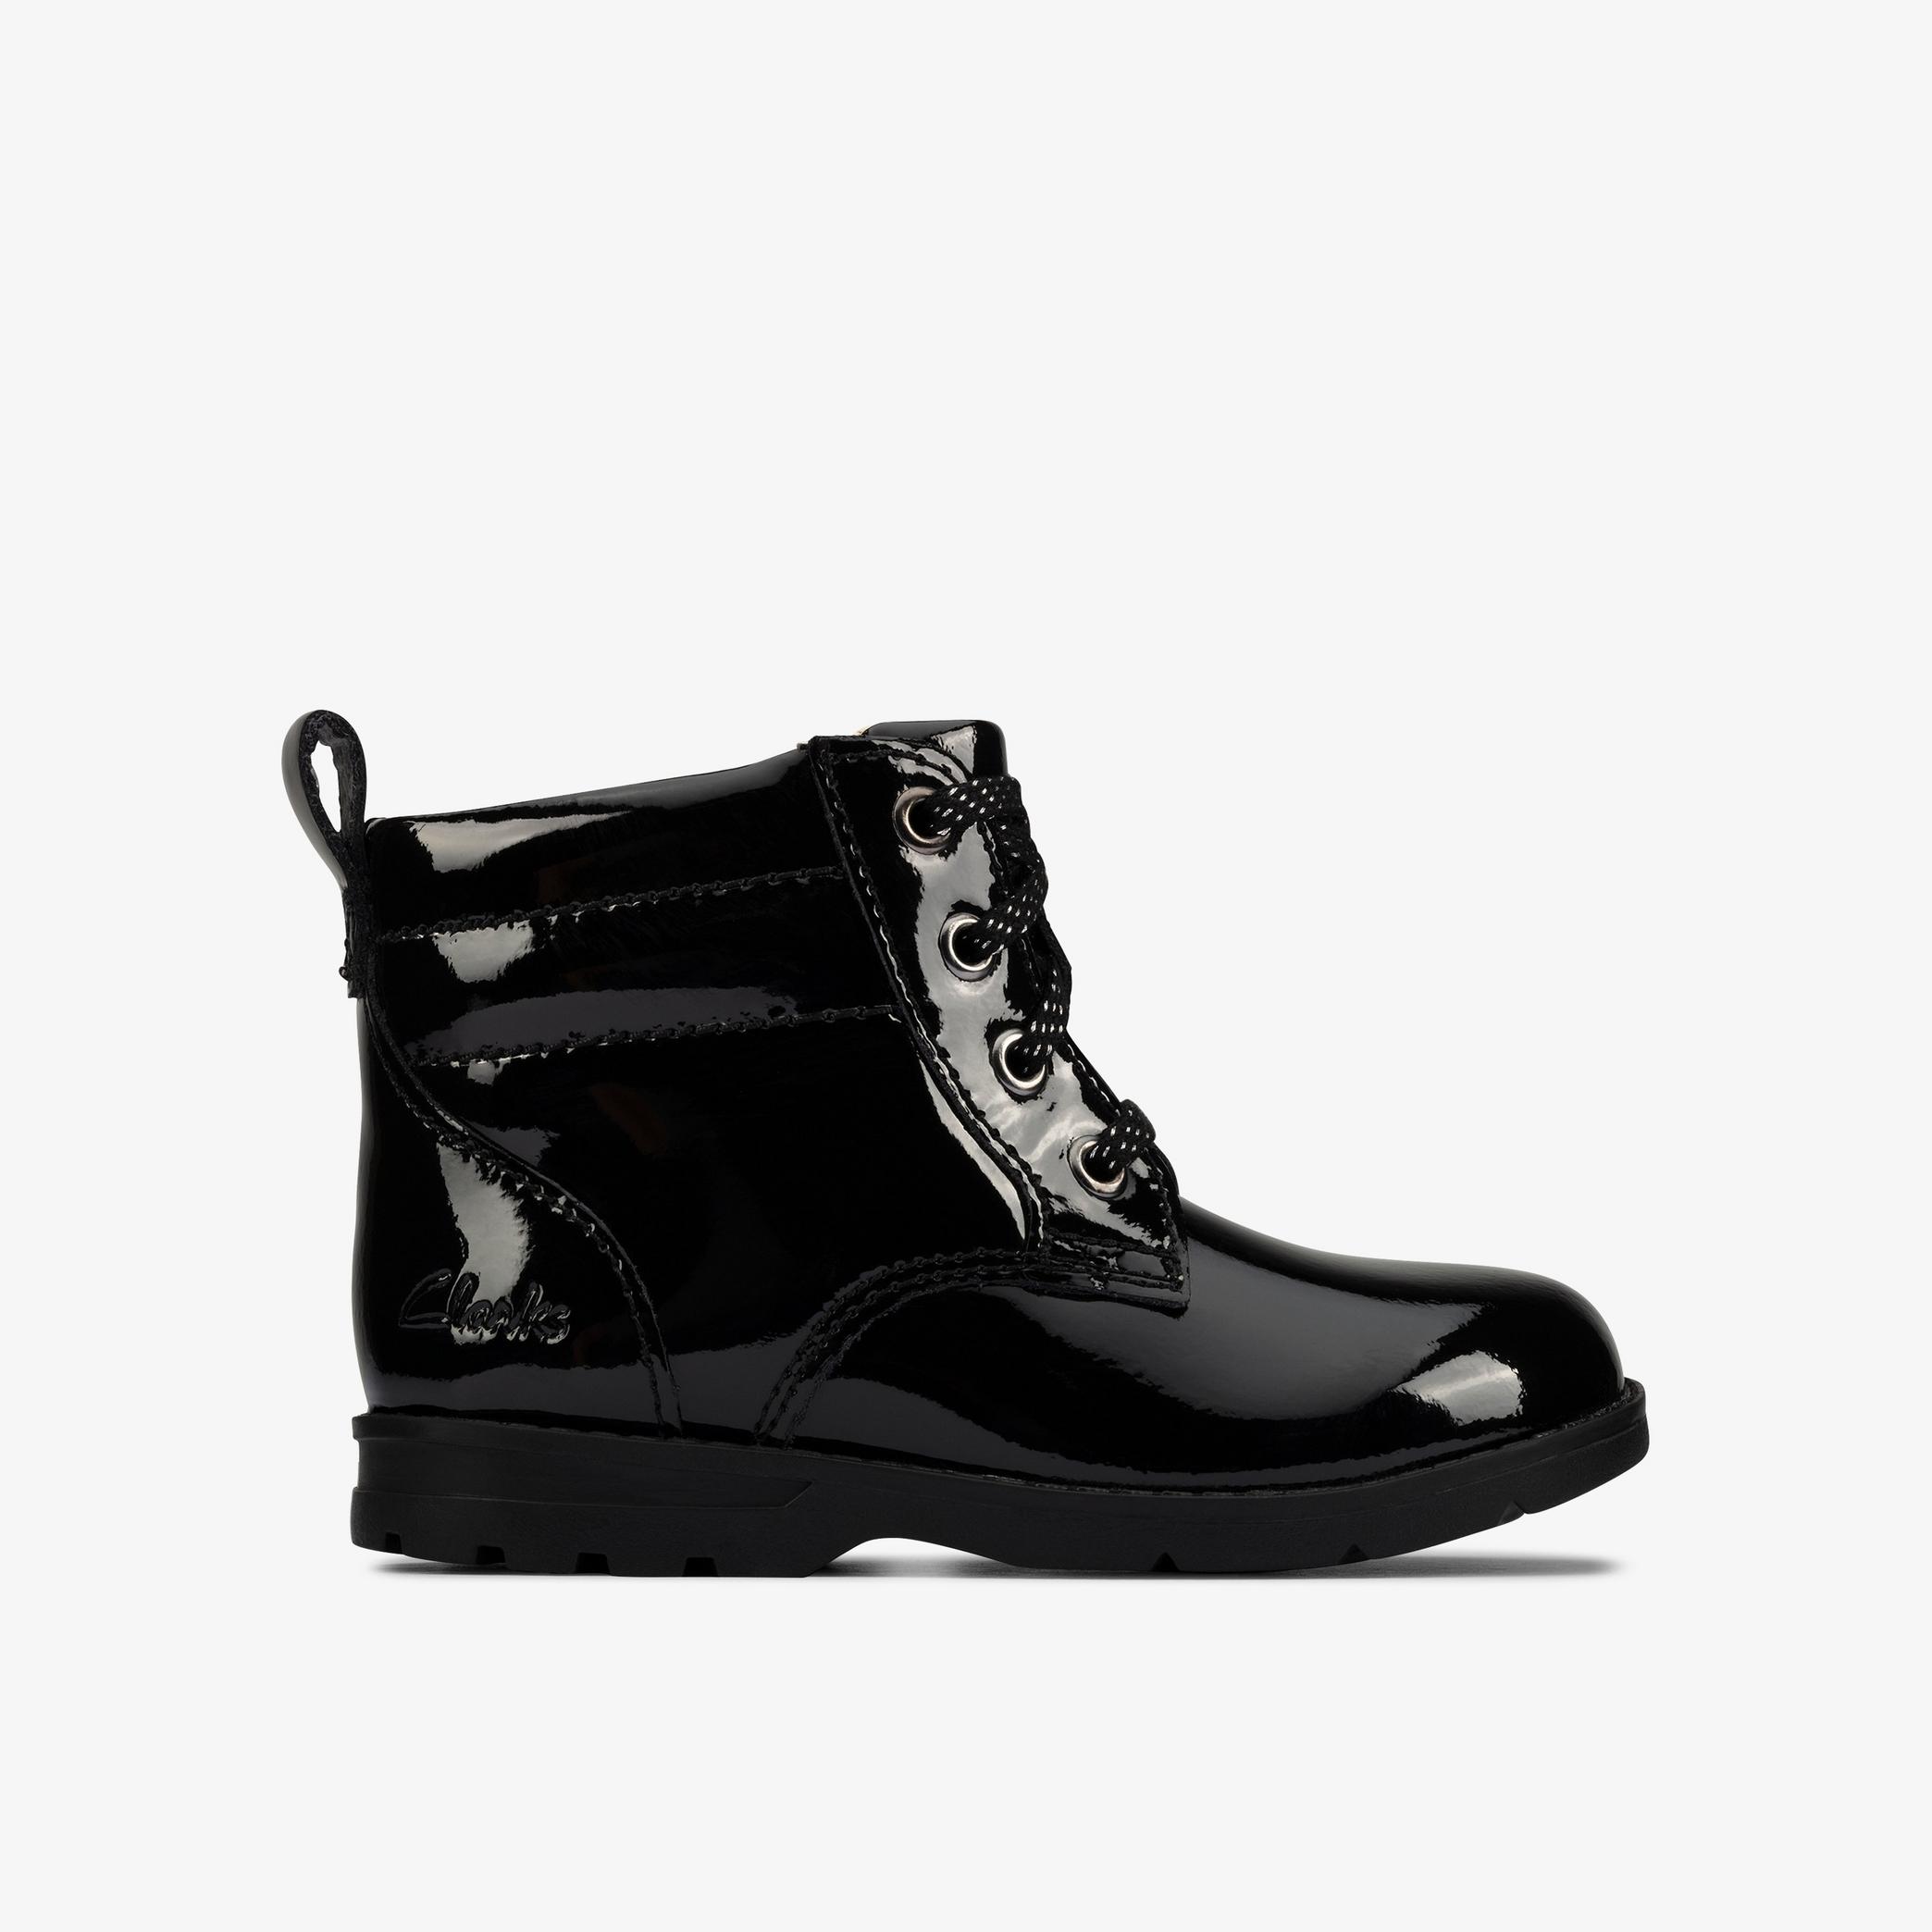 Dabi Lace Toddler Black Patent Boots, view 1 of 6